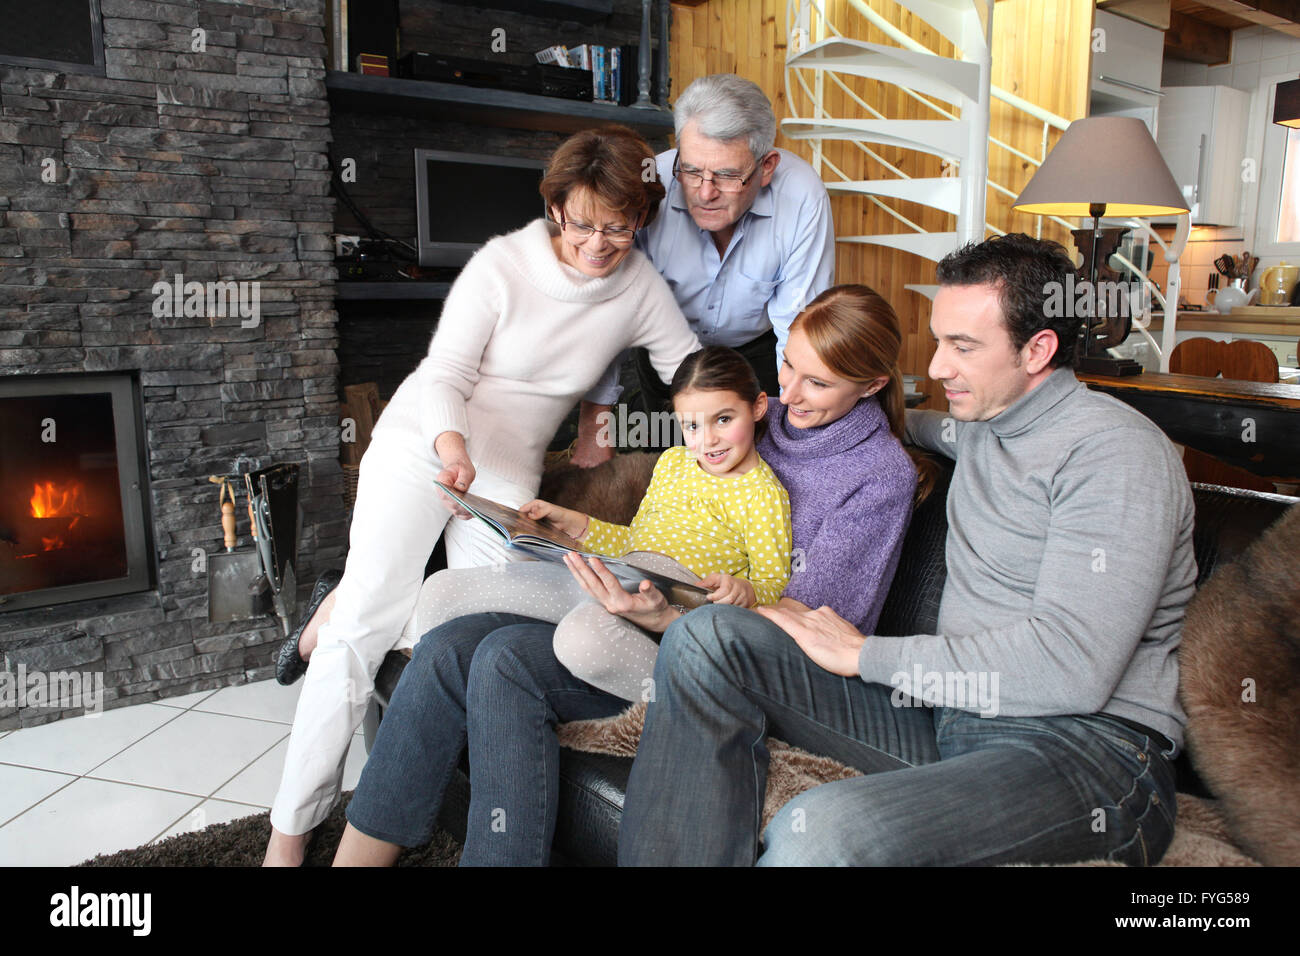 Family gathered together looking at photographs Stock Photo